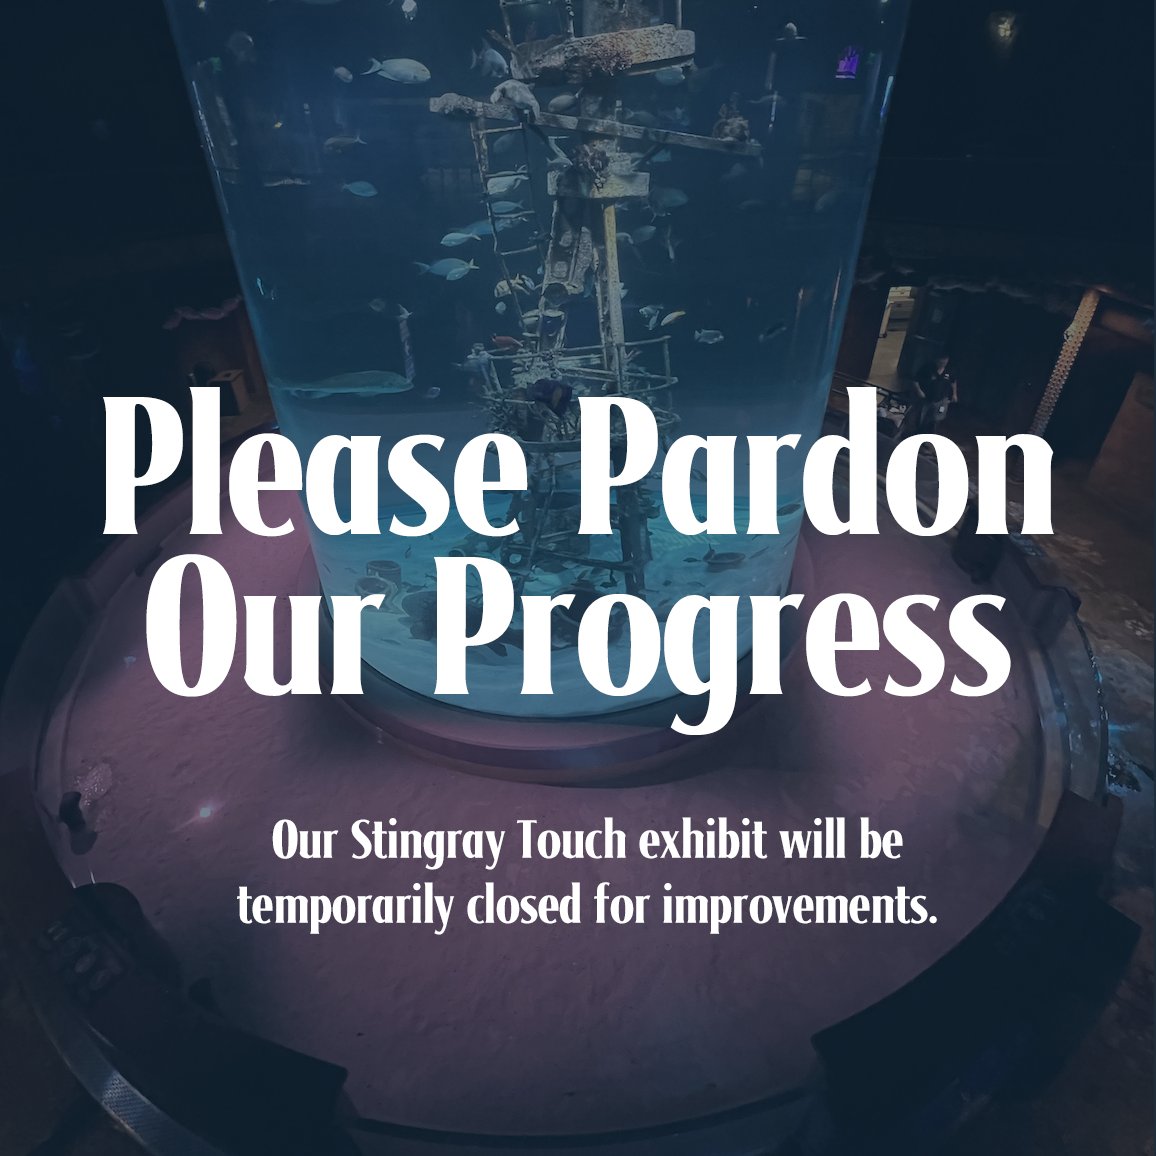 Beginning today, April 3, our Stingray Touch exhibit will be closed for improvements. The Virtual Aquarium will still be open! We always strive to improve the experience for guests while keeping our animals' wellbeing at the forefront. We apologize for any inconvenience.